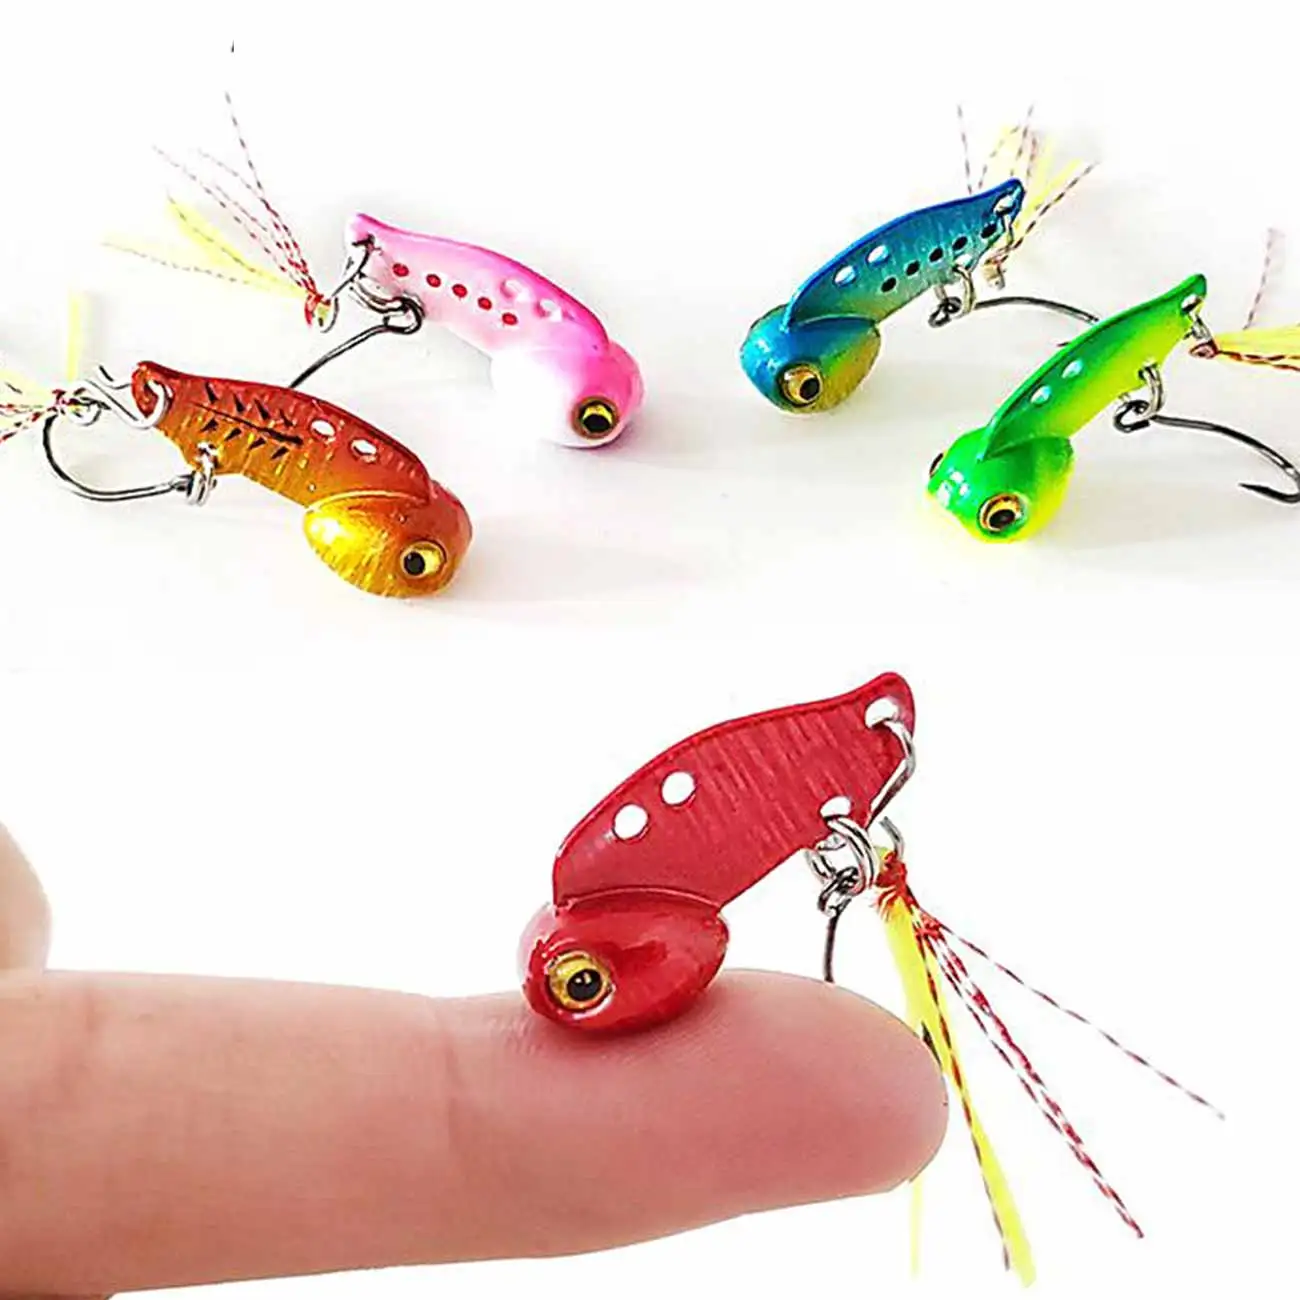 

Metal Mini VIB With Rainbow Feather Fishing Lure 3g 6g Pin Crank Bait Vibration Spinner Sinking Bait Fishing Tackle